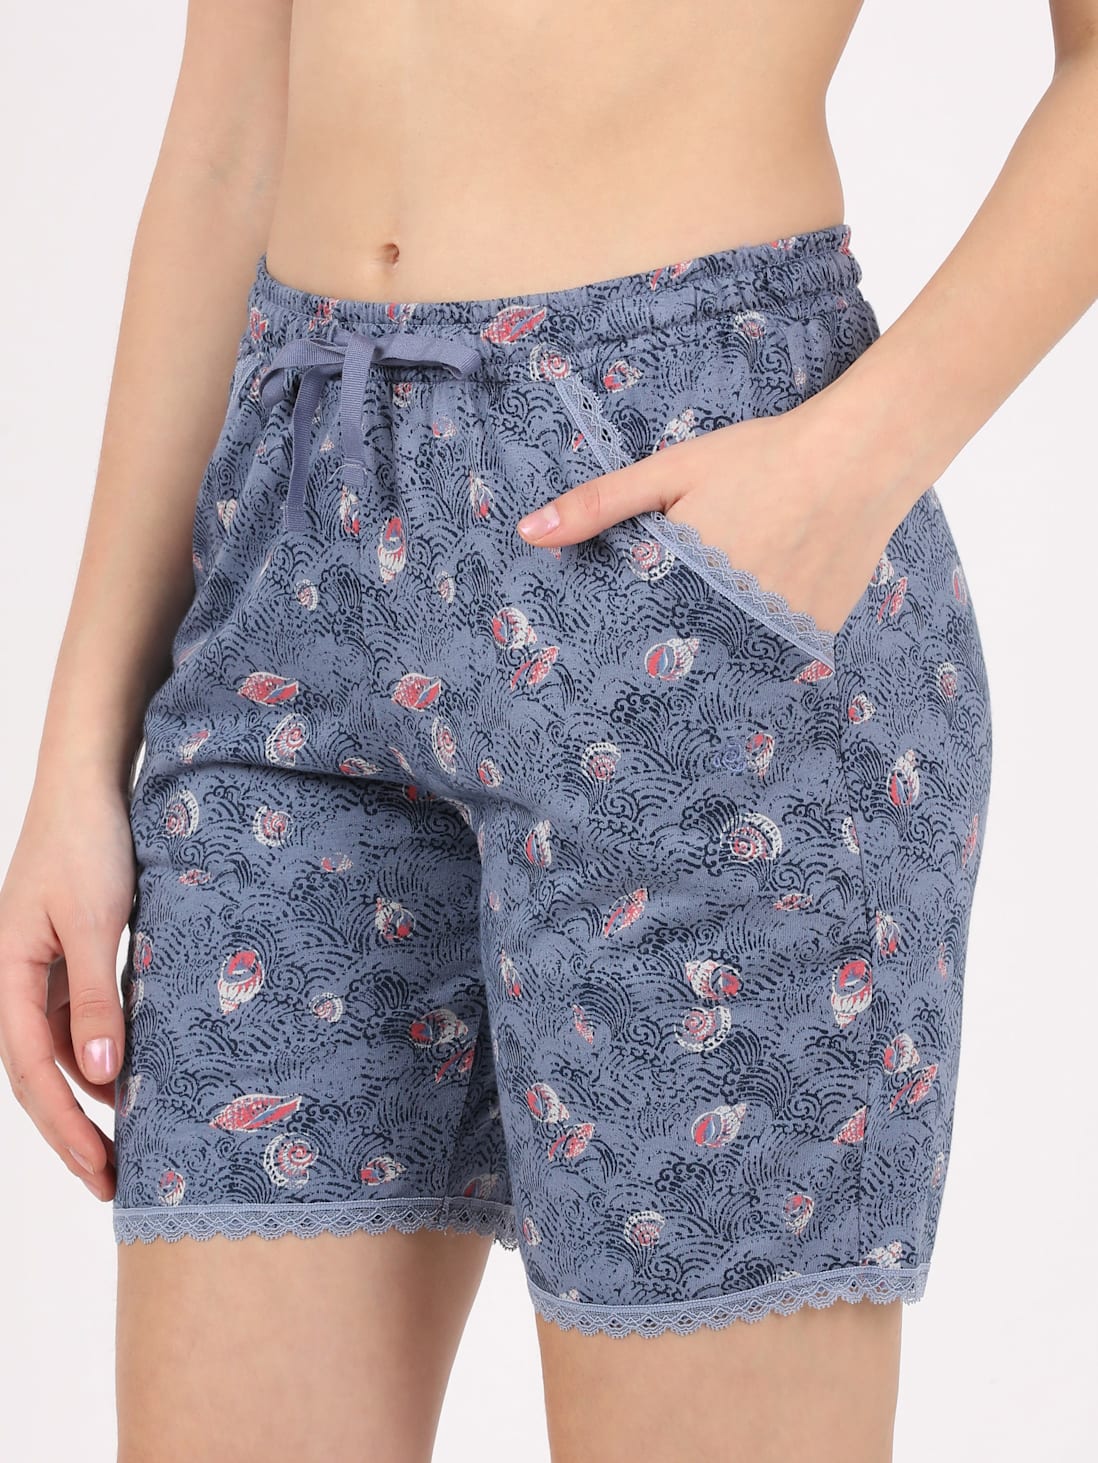 Buy Women's Micro Modal Cotton Relaxed Fit Printed Shorts with Lace ...